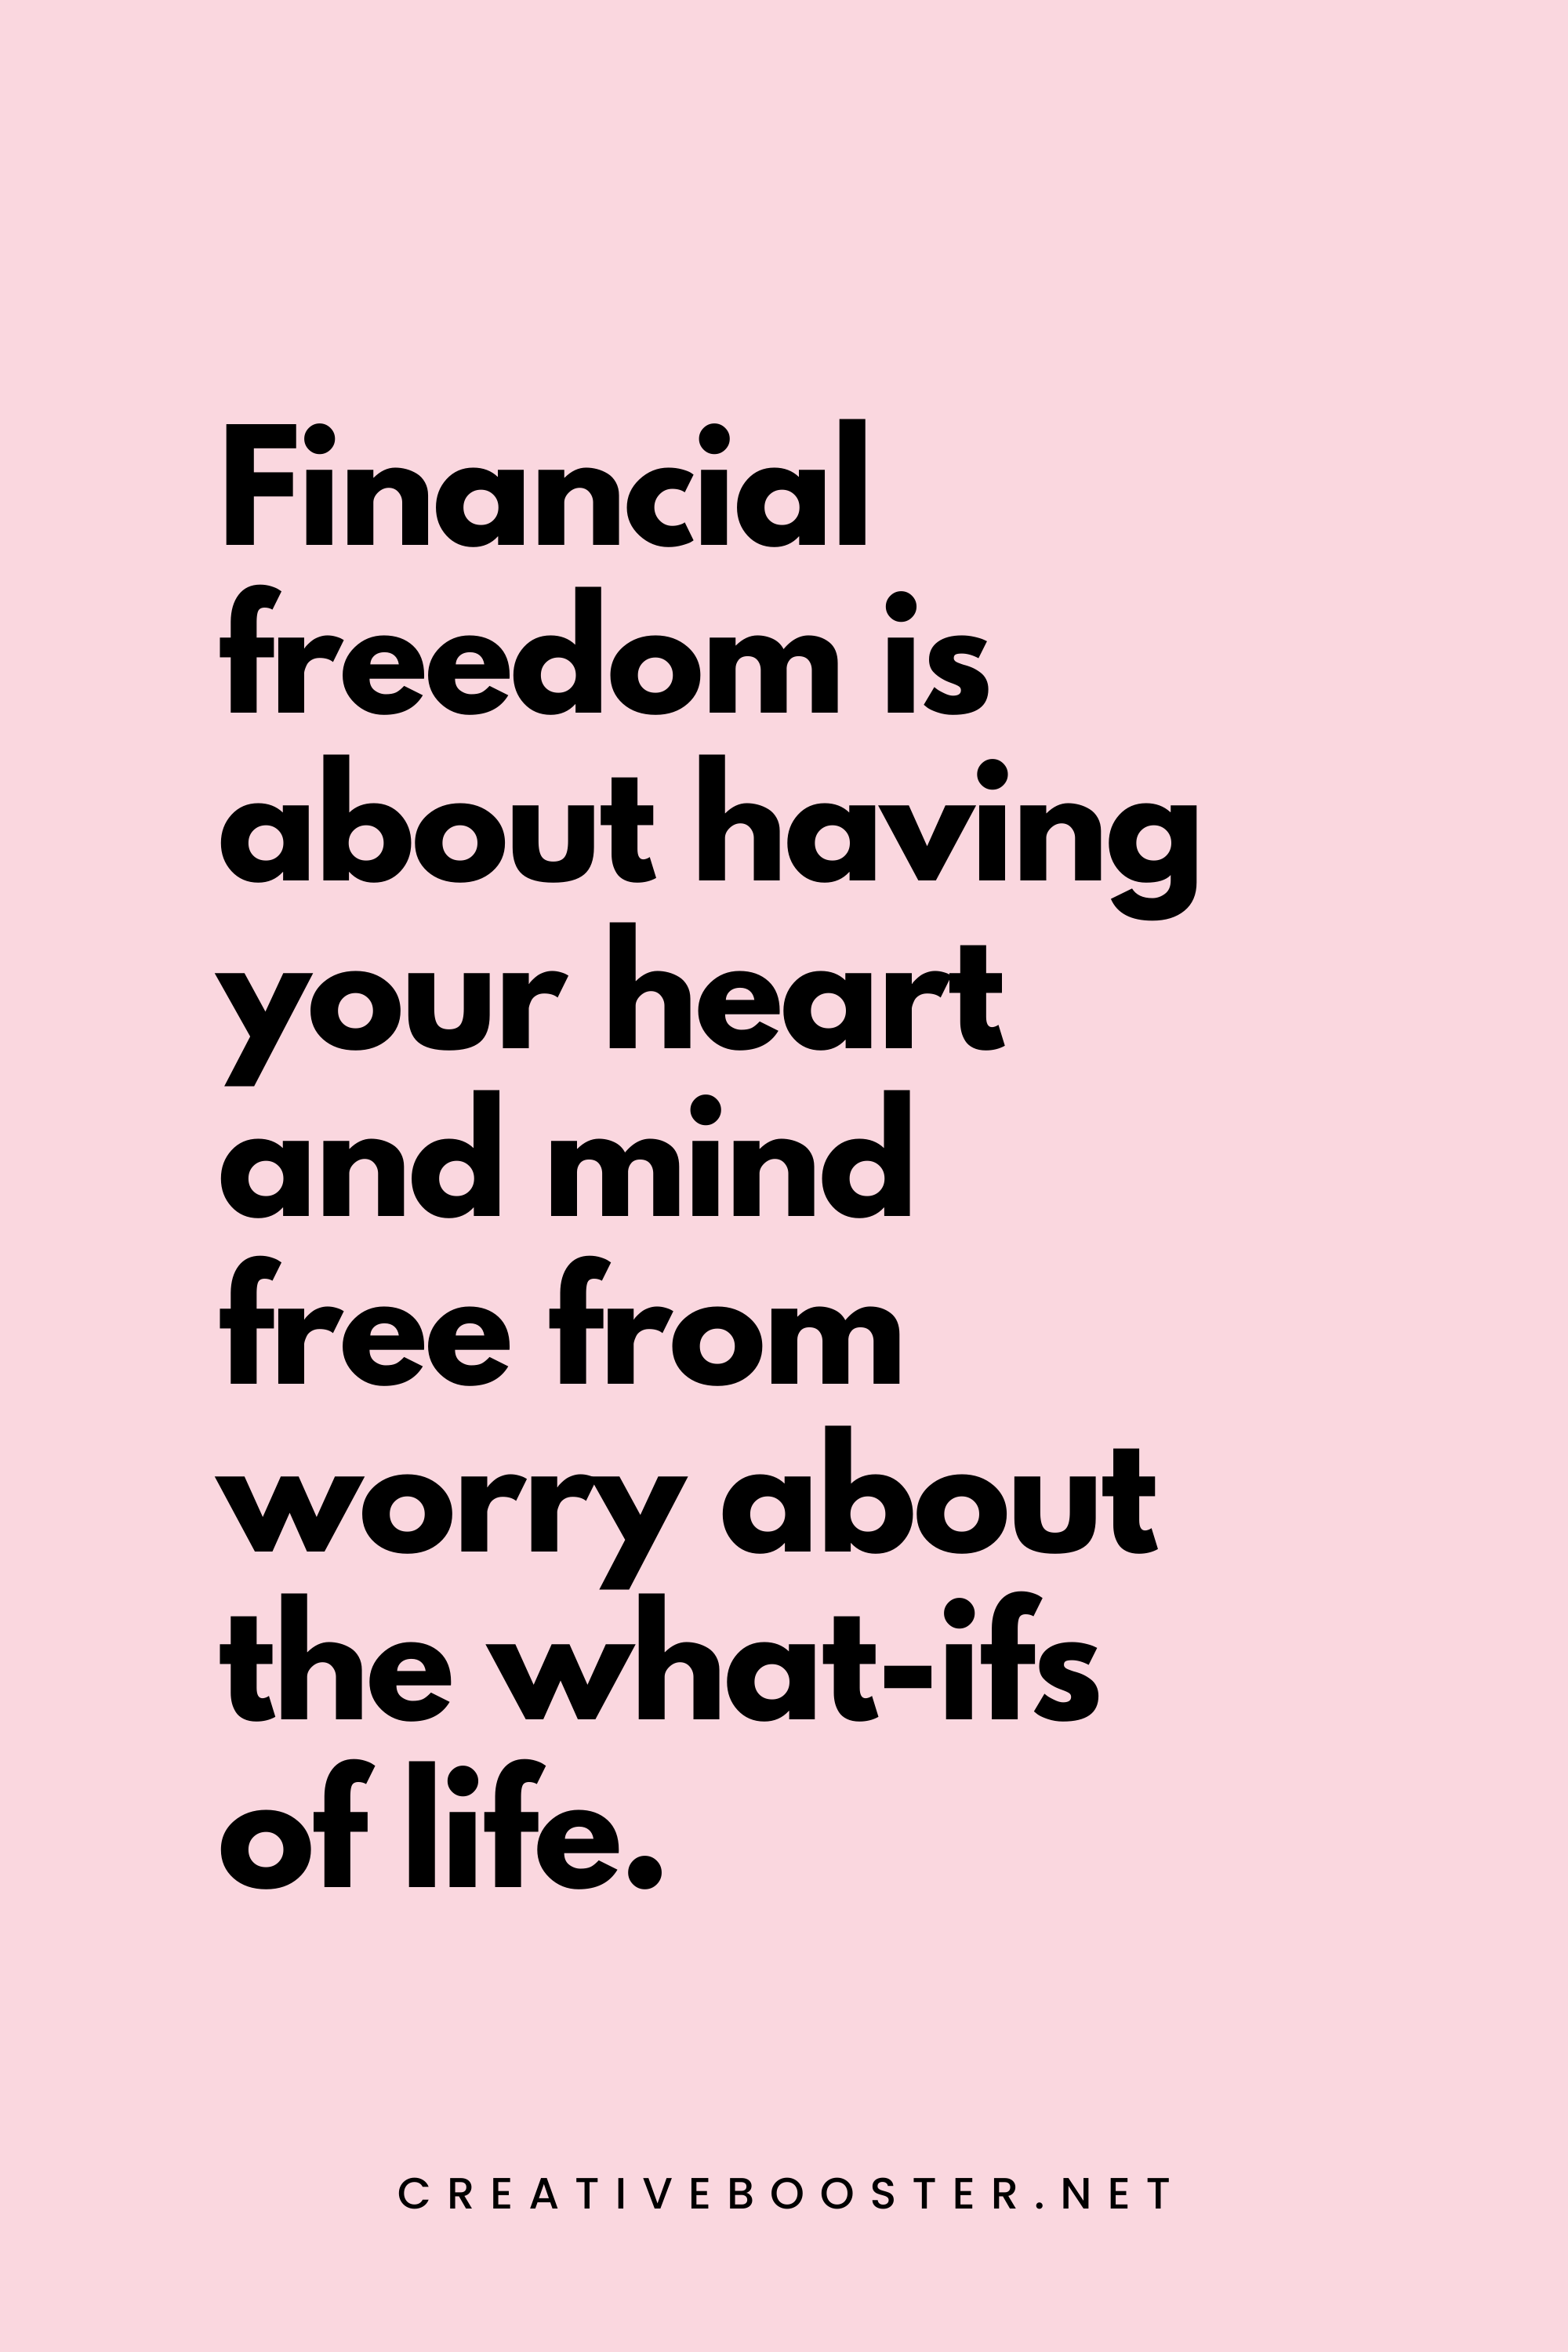 45. Financial freedom is about having your heart and mind free from worry about the what-ifs of life. - Suze Orman - 4. Financial Freedom Quotes for Women